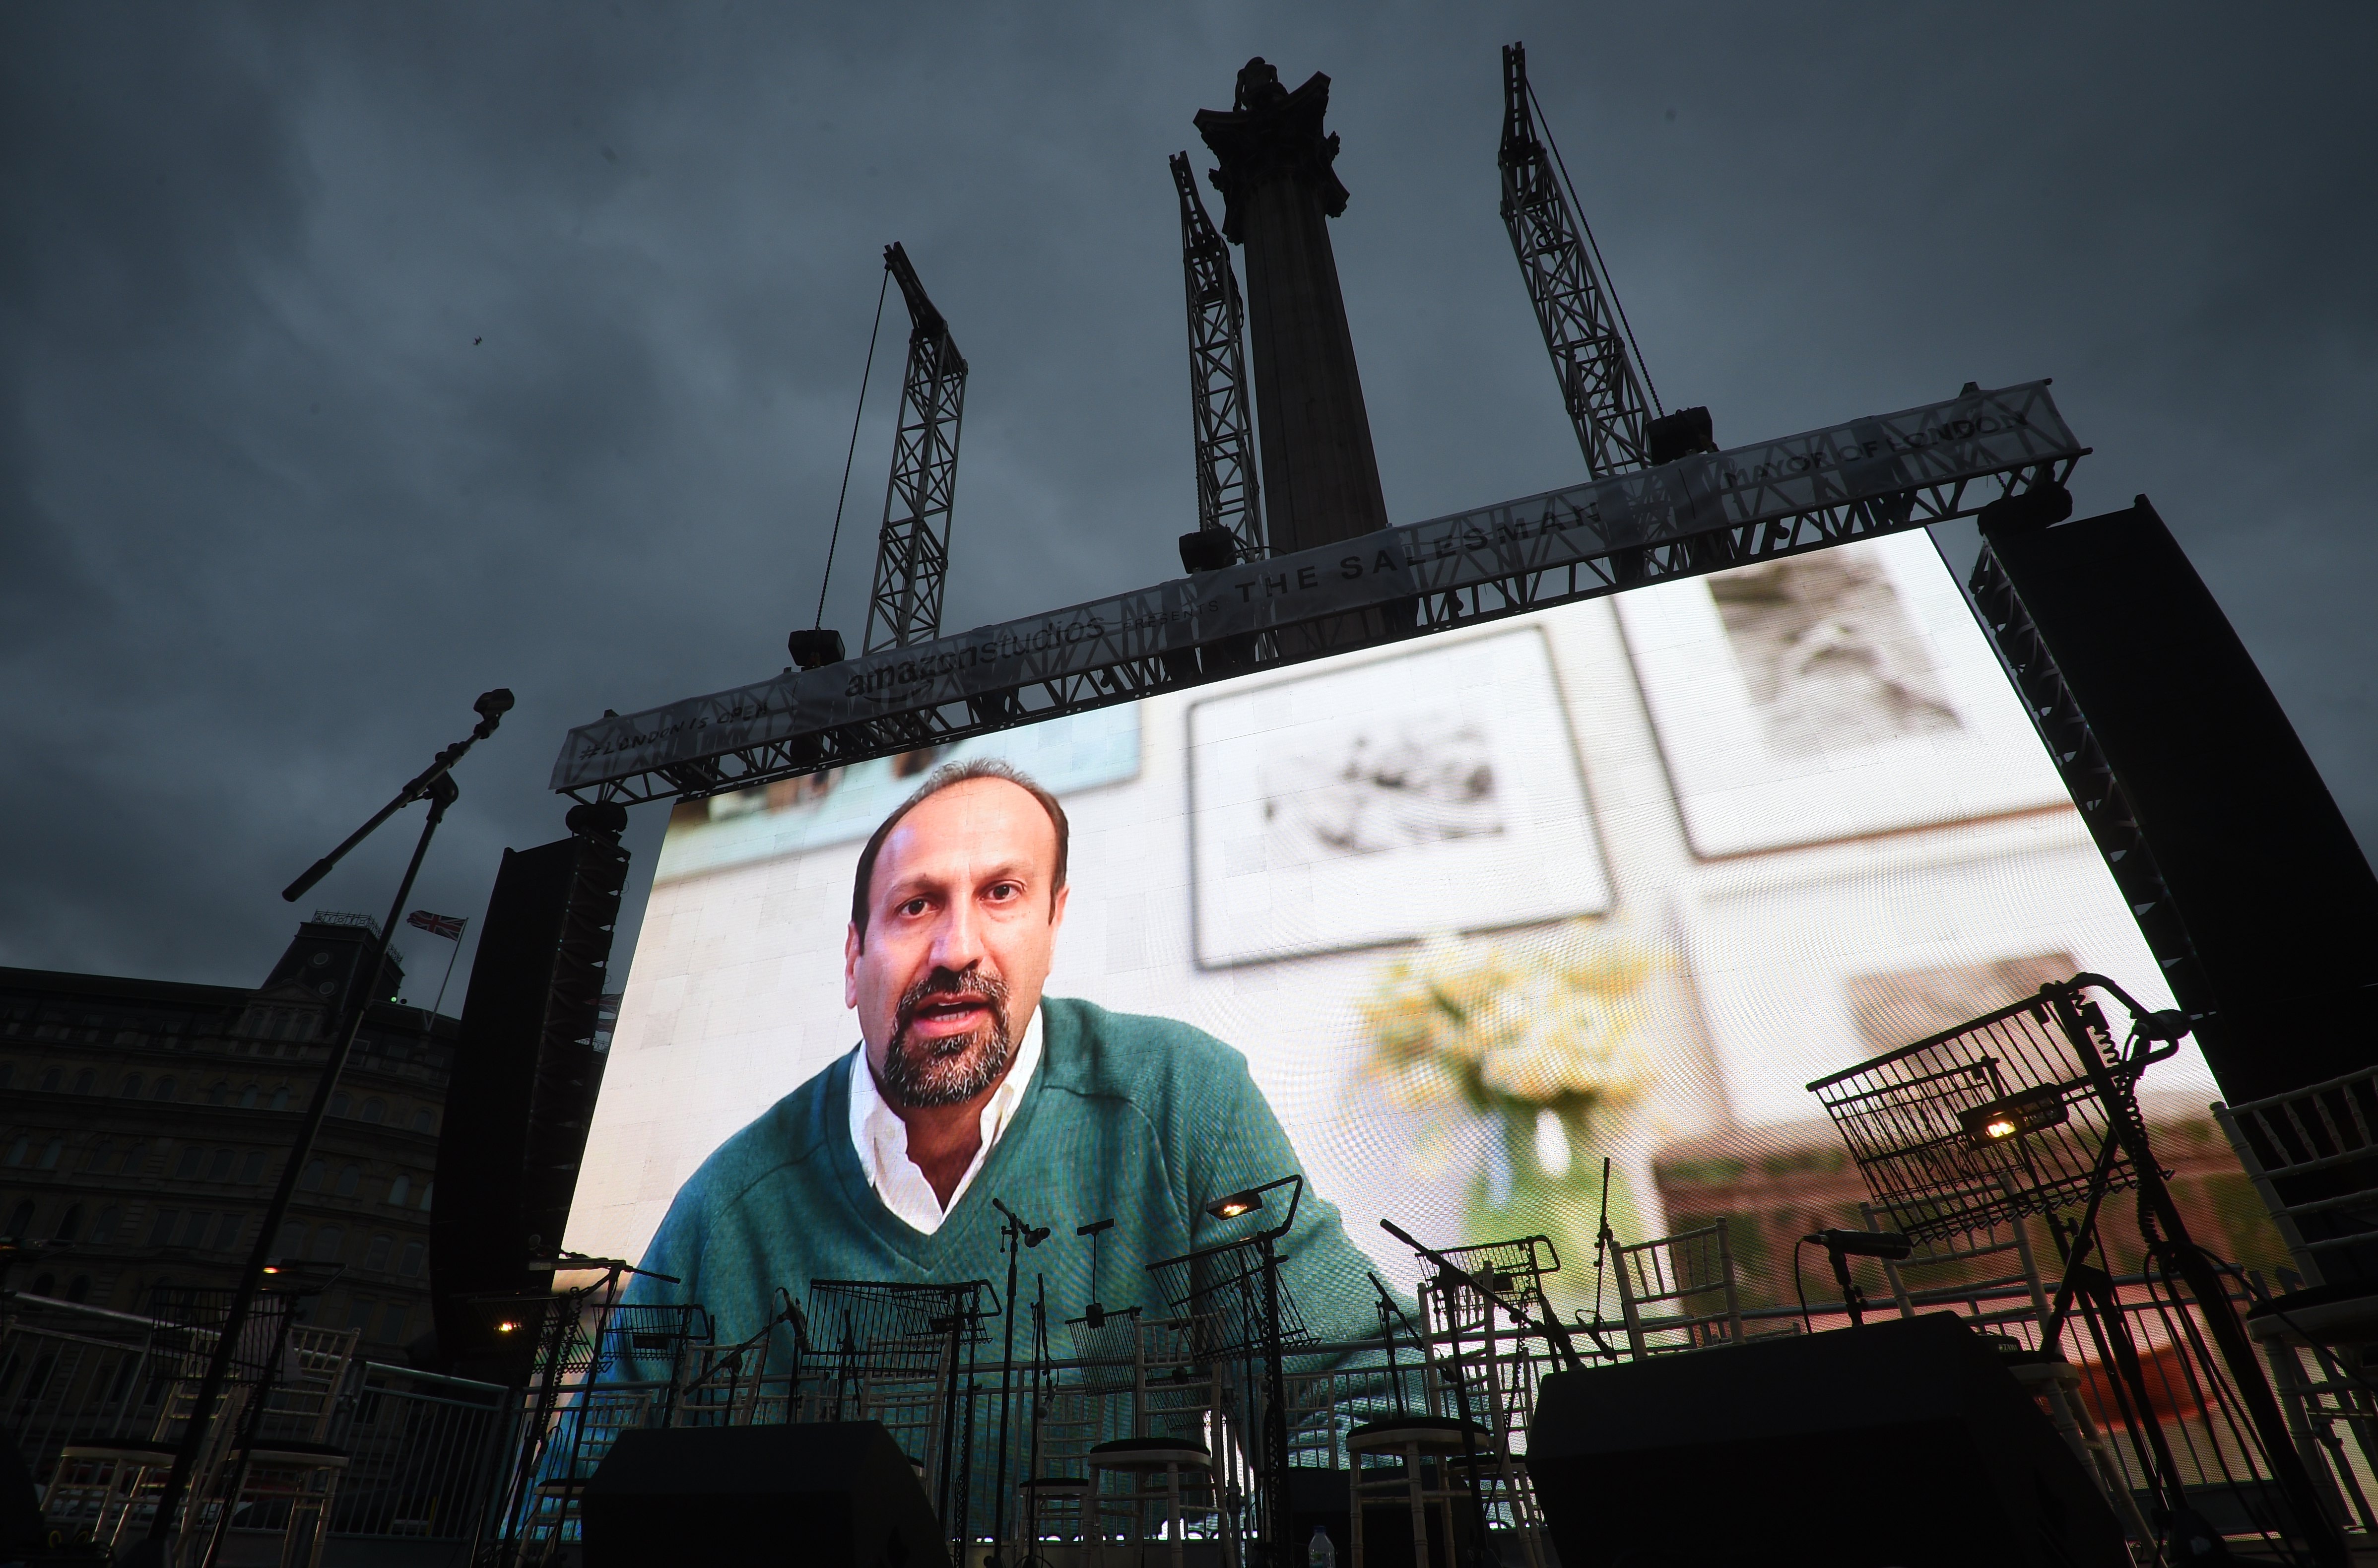 2017-02-26 16:44:31 epa05816685 Iranian film director, Asghar Farhadi, is seen on a screen as he sends a video message during a screening of his Oscar-nominated film 'the Salesman' in Traflagar Square in London, Britain, 26 February 2017. The film director Asghar Farhadi announced he will not attend for the Oscar ceremony on 26 february in Los Angeles, following US Presidents Donald J.Trump executive order banning travel to the United States from seven Muslim-majority countries. EPA/FACUNDO ARRIZABALAGA